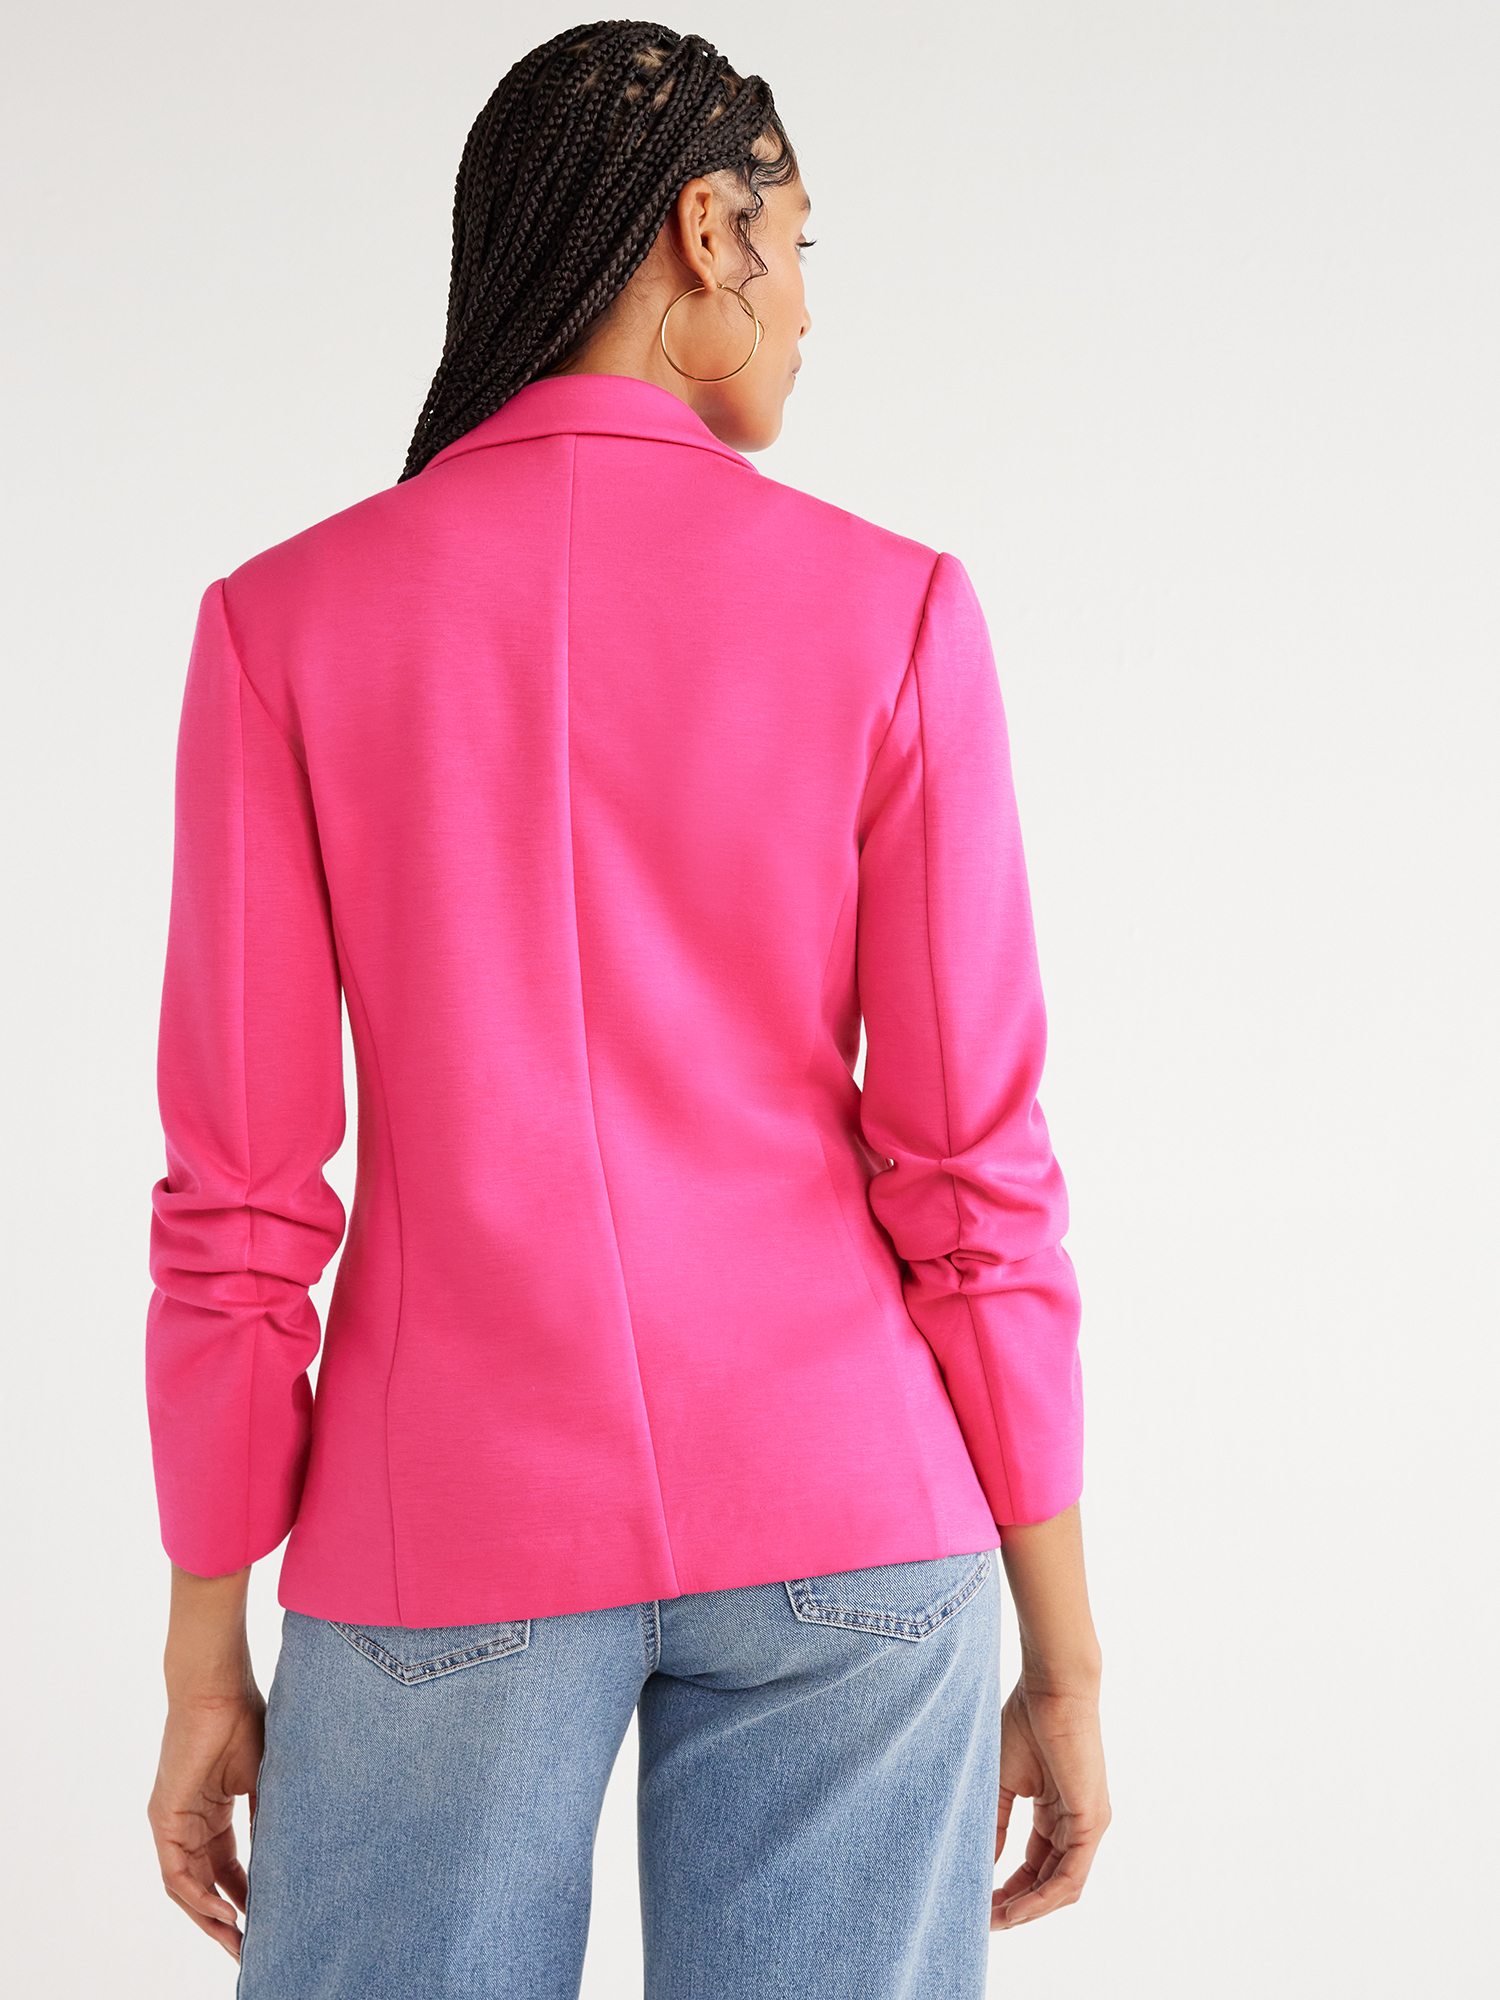 Scoop Women's Relaxed Scuba Knit Stretch Blazer with Scrunch Sleeves, Sizes XS-XXL - image 3 of 5